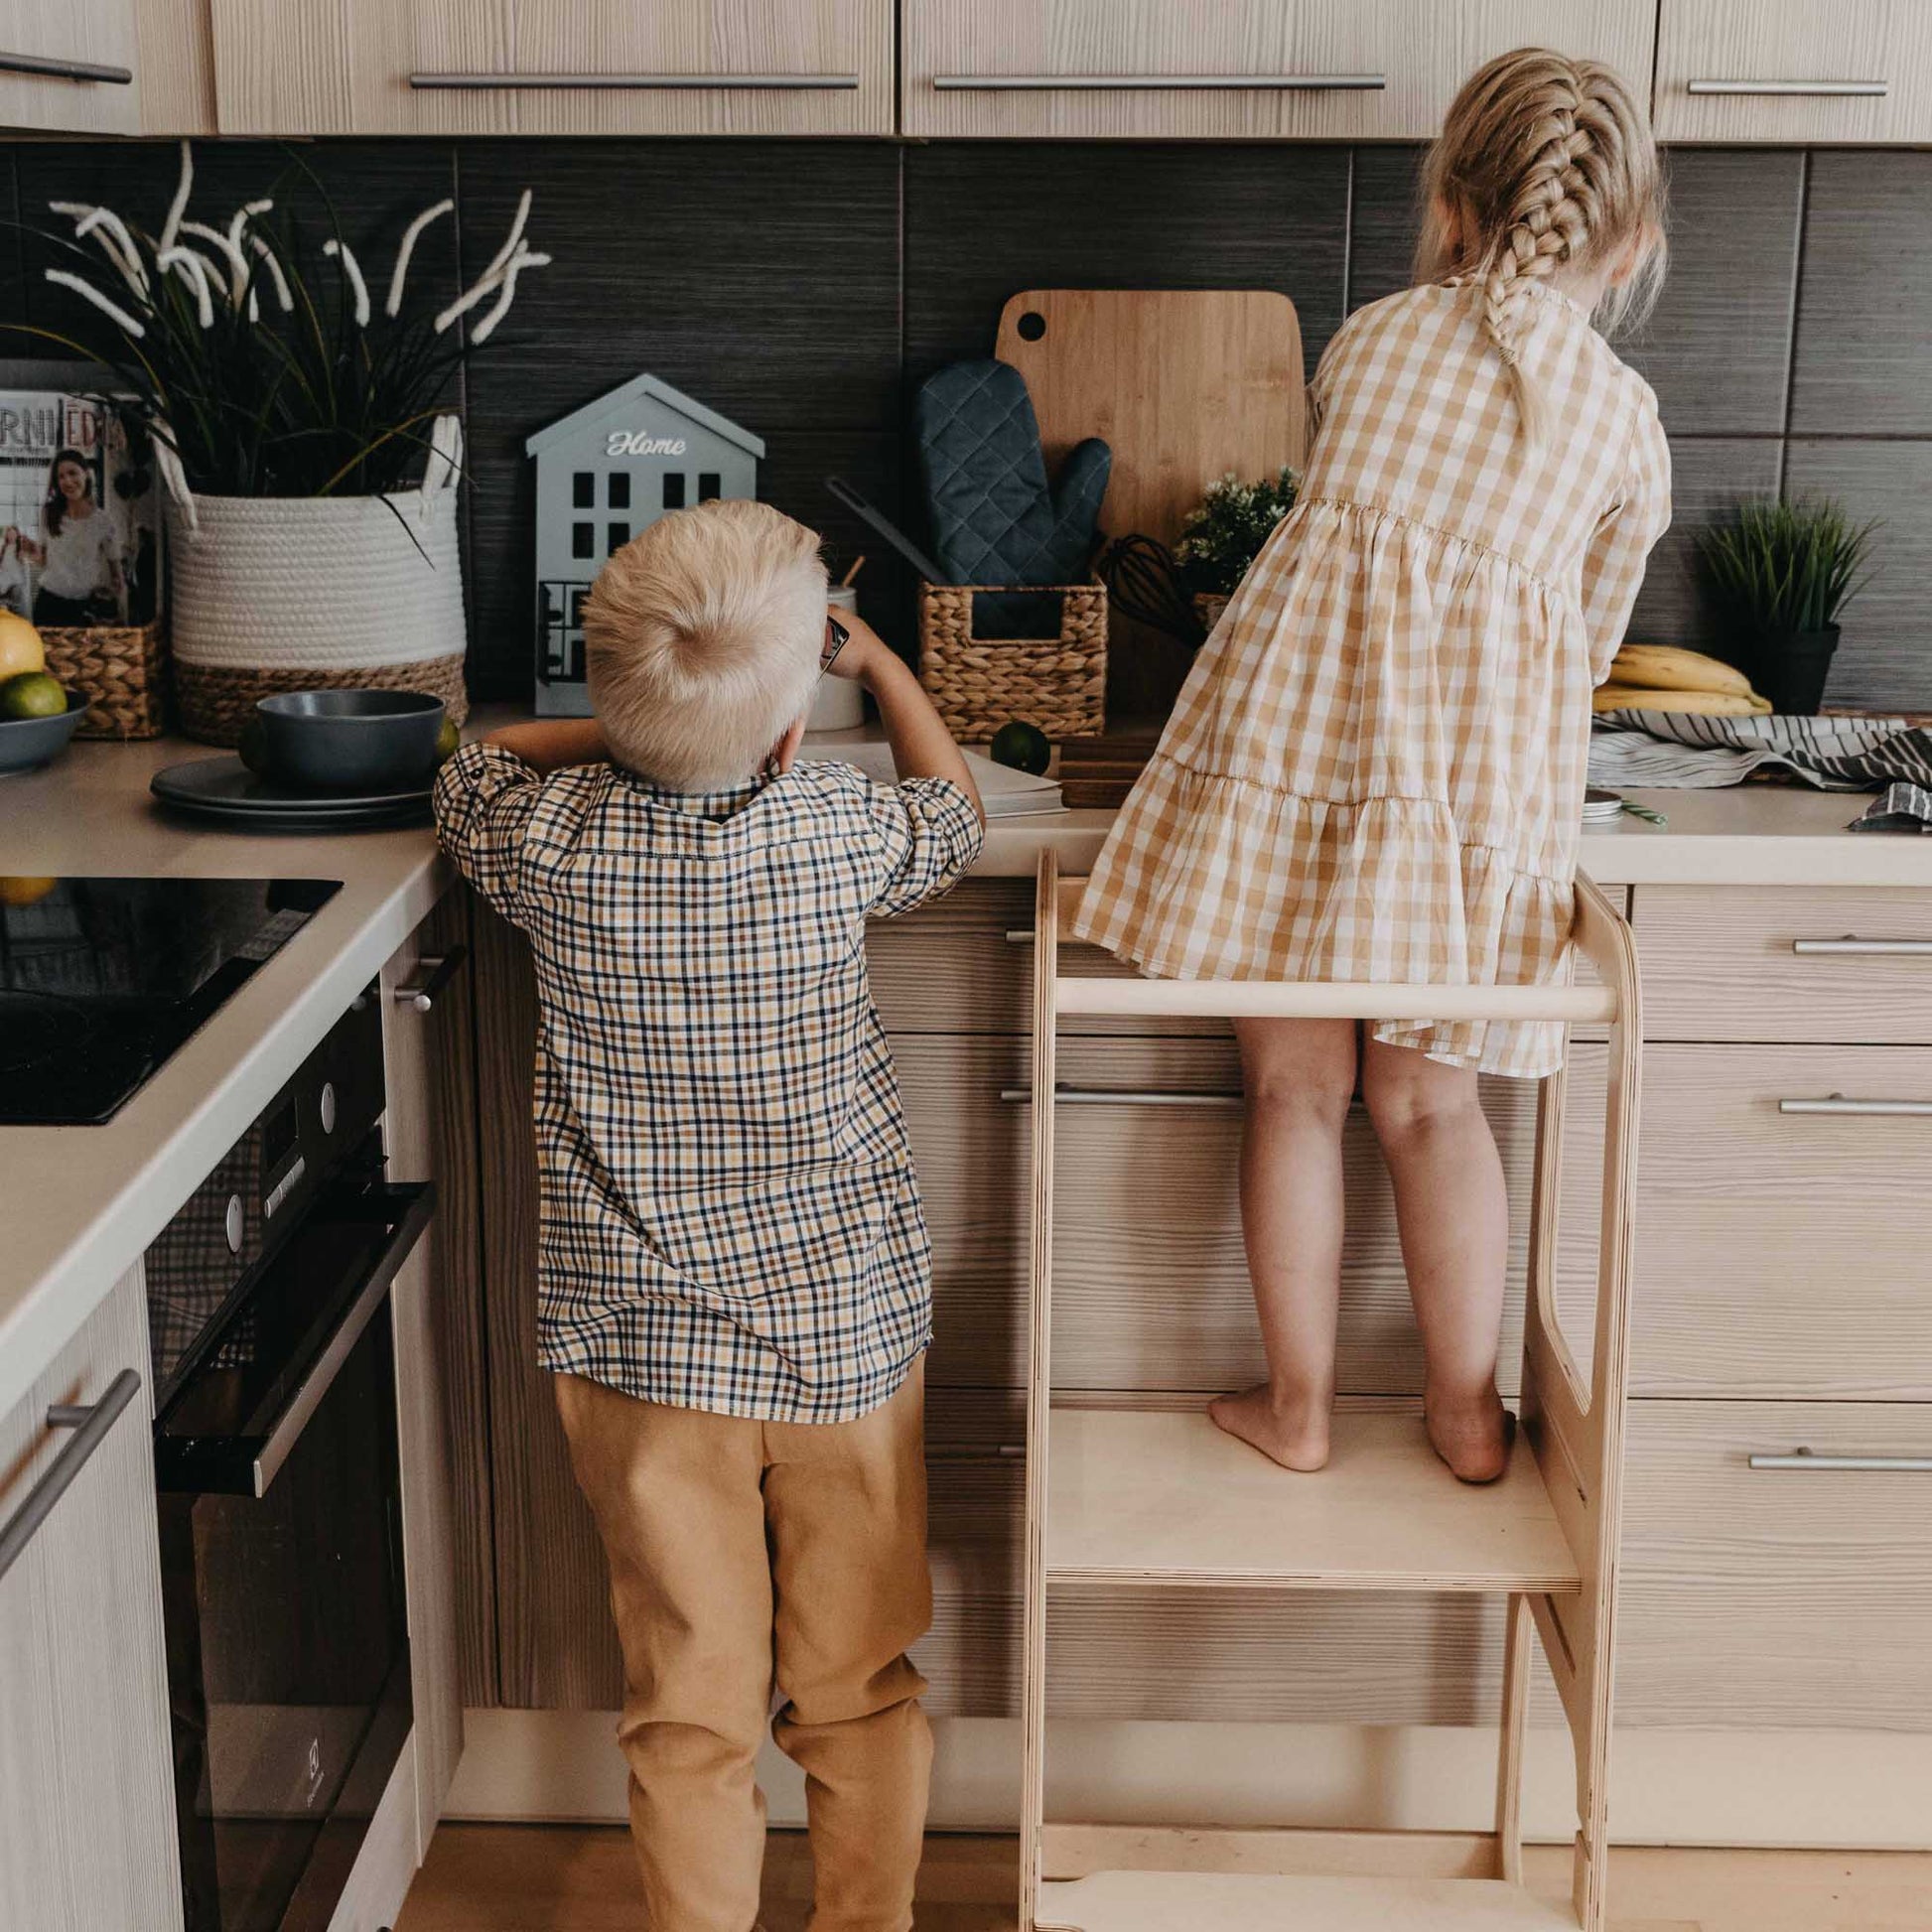 Two children standing on a Sweet Home From Wood Kids' kitchen tower with 3 height levels in a kitchen.